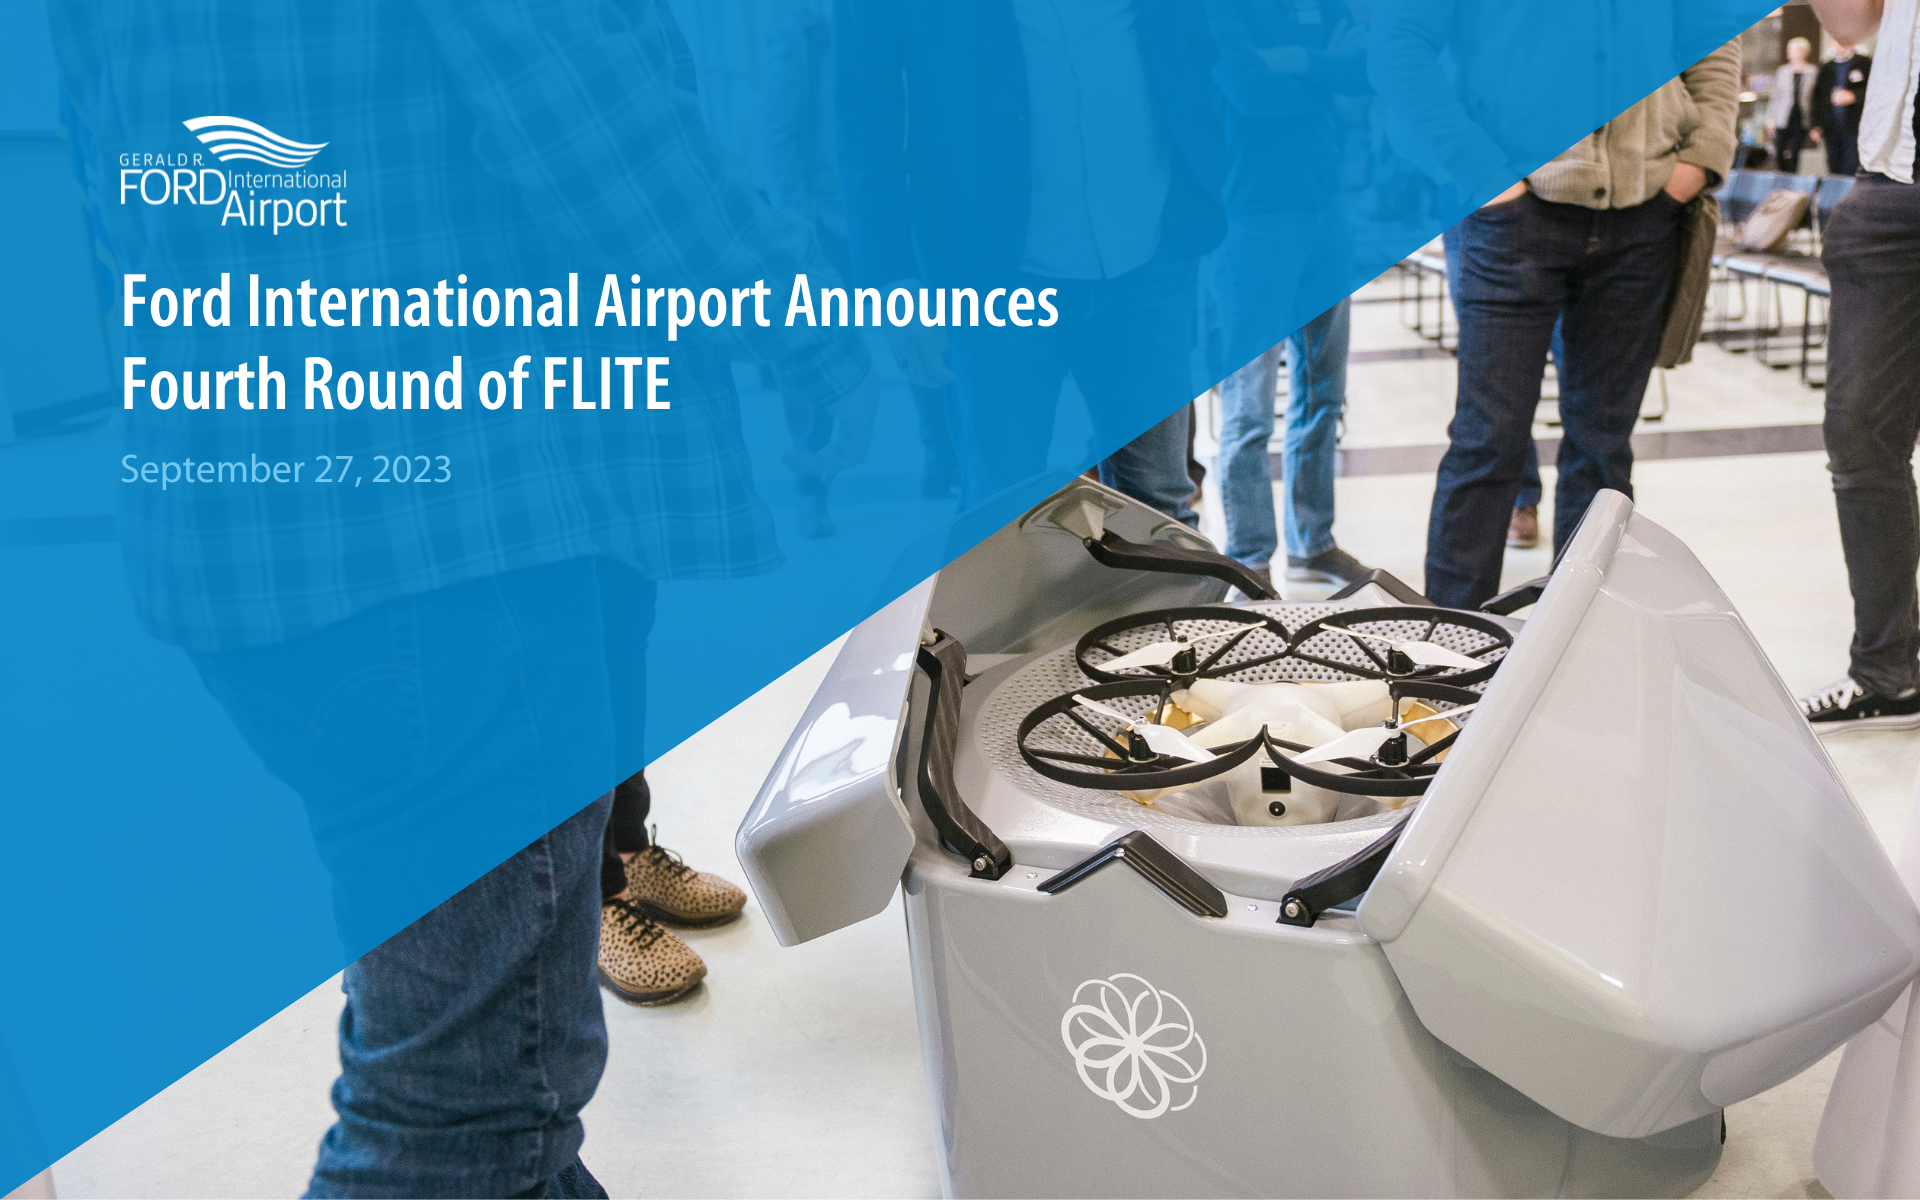 Ford International Airport Announces Fourth Round of FLITE